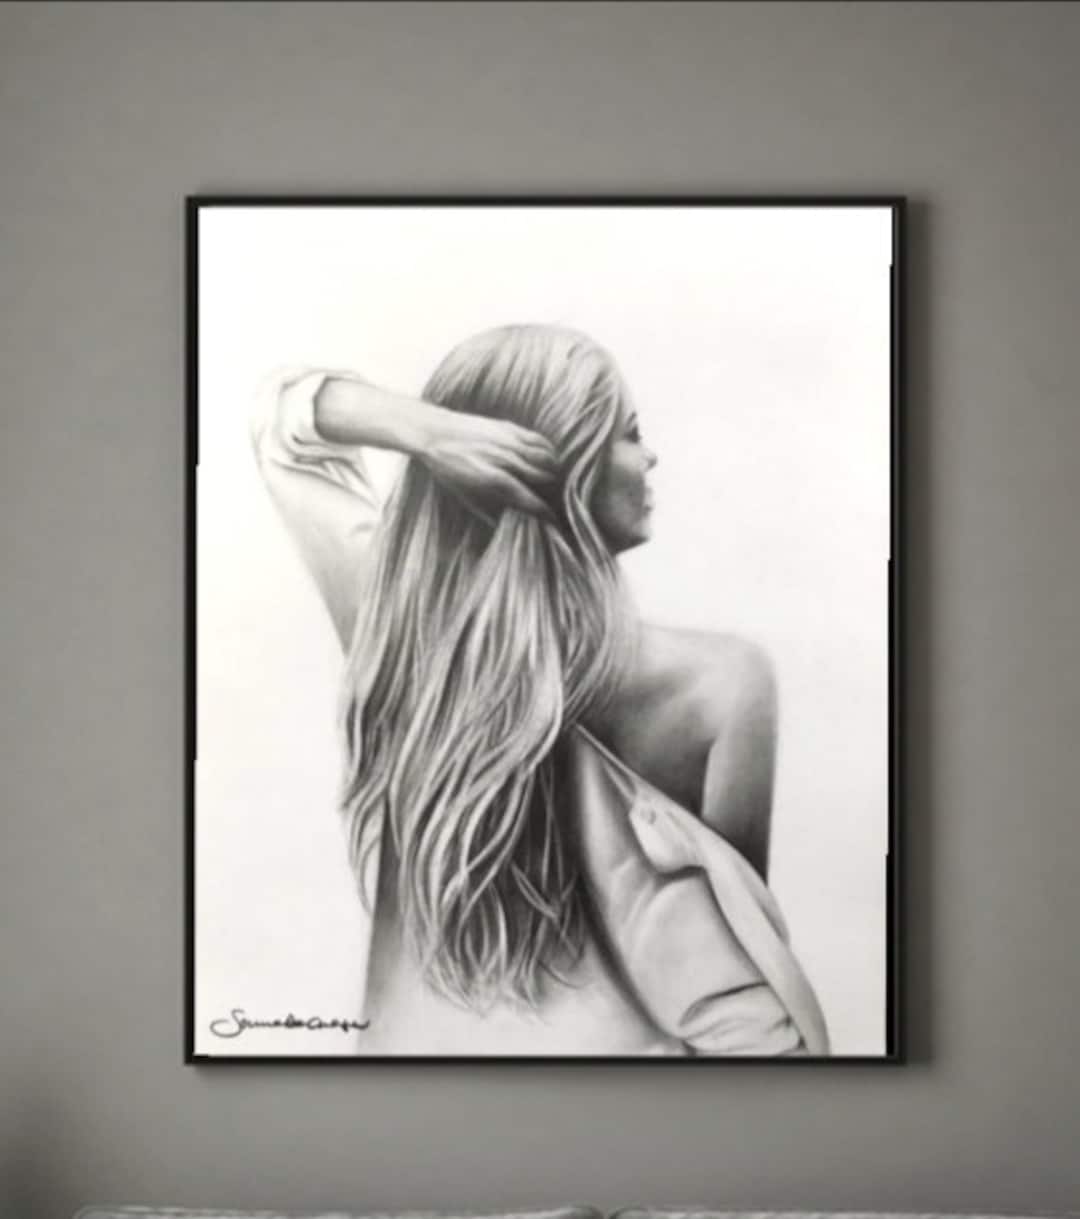 Hot girl Pencil drawings - A4 size - Black and White